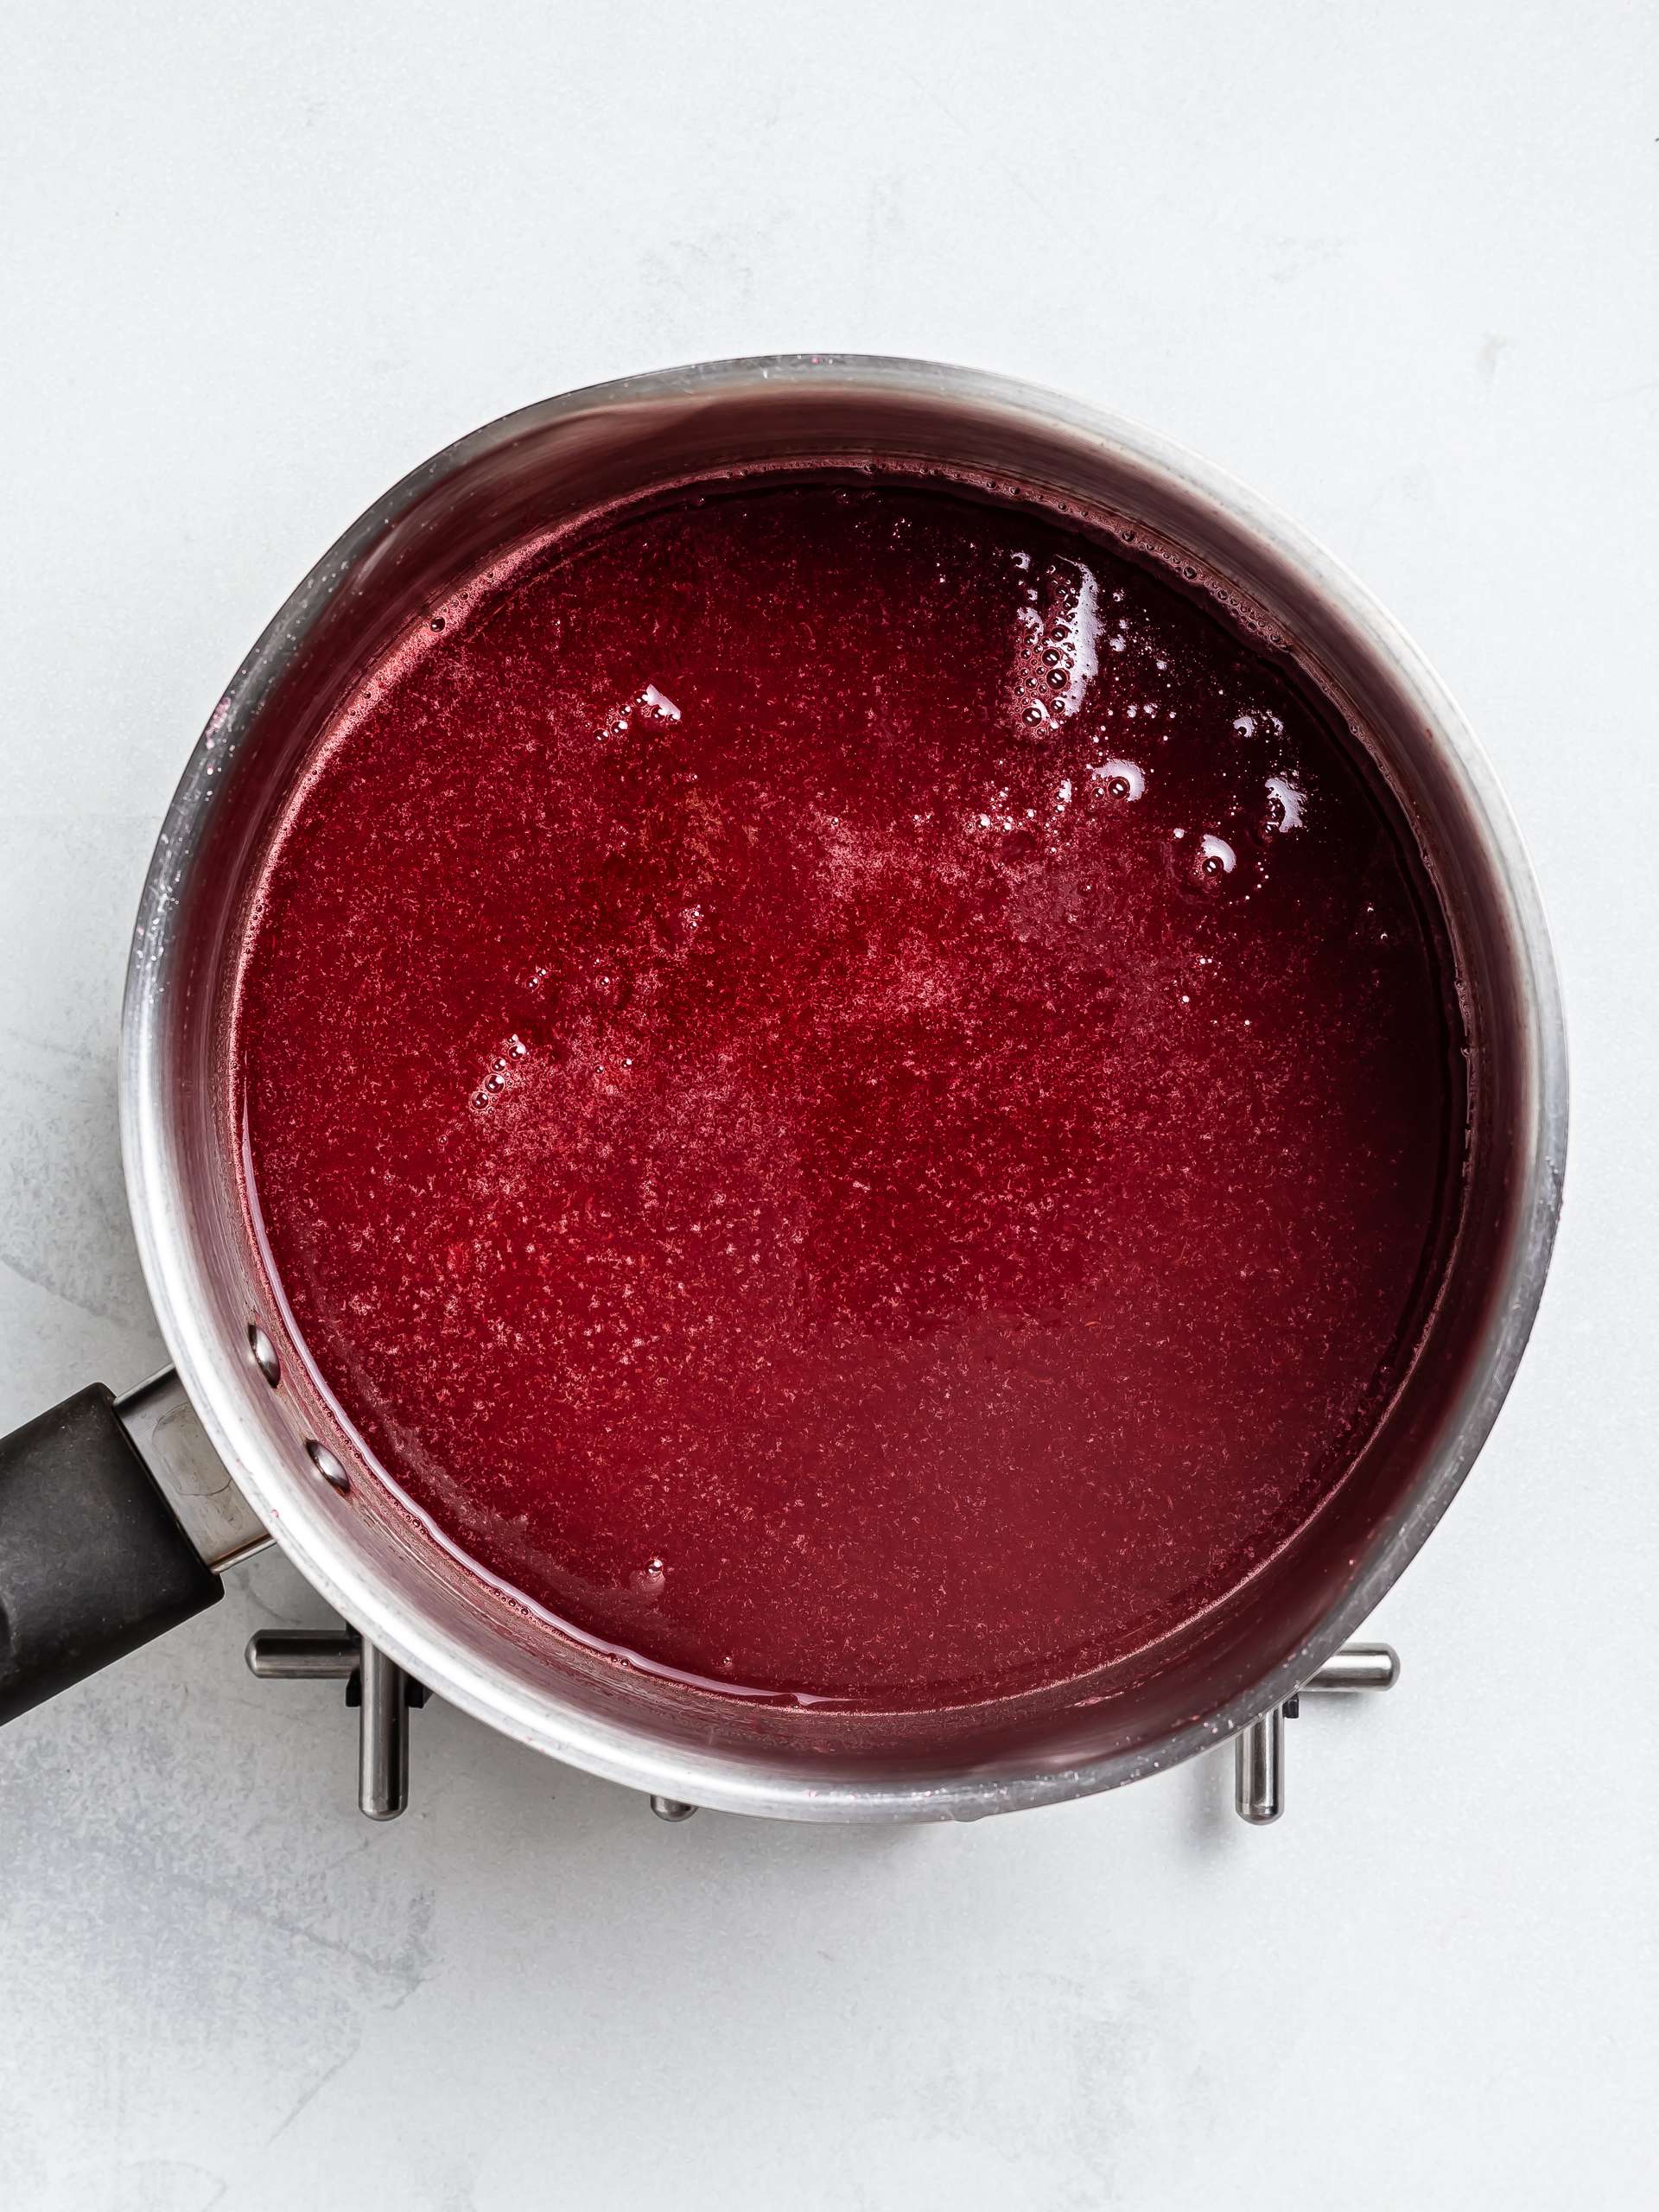 apple raspberry jam cooking in a pot